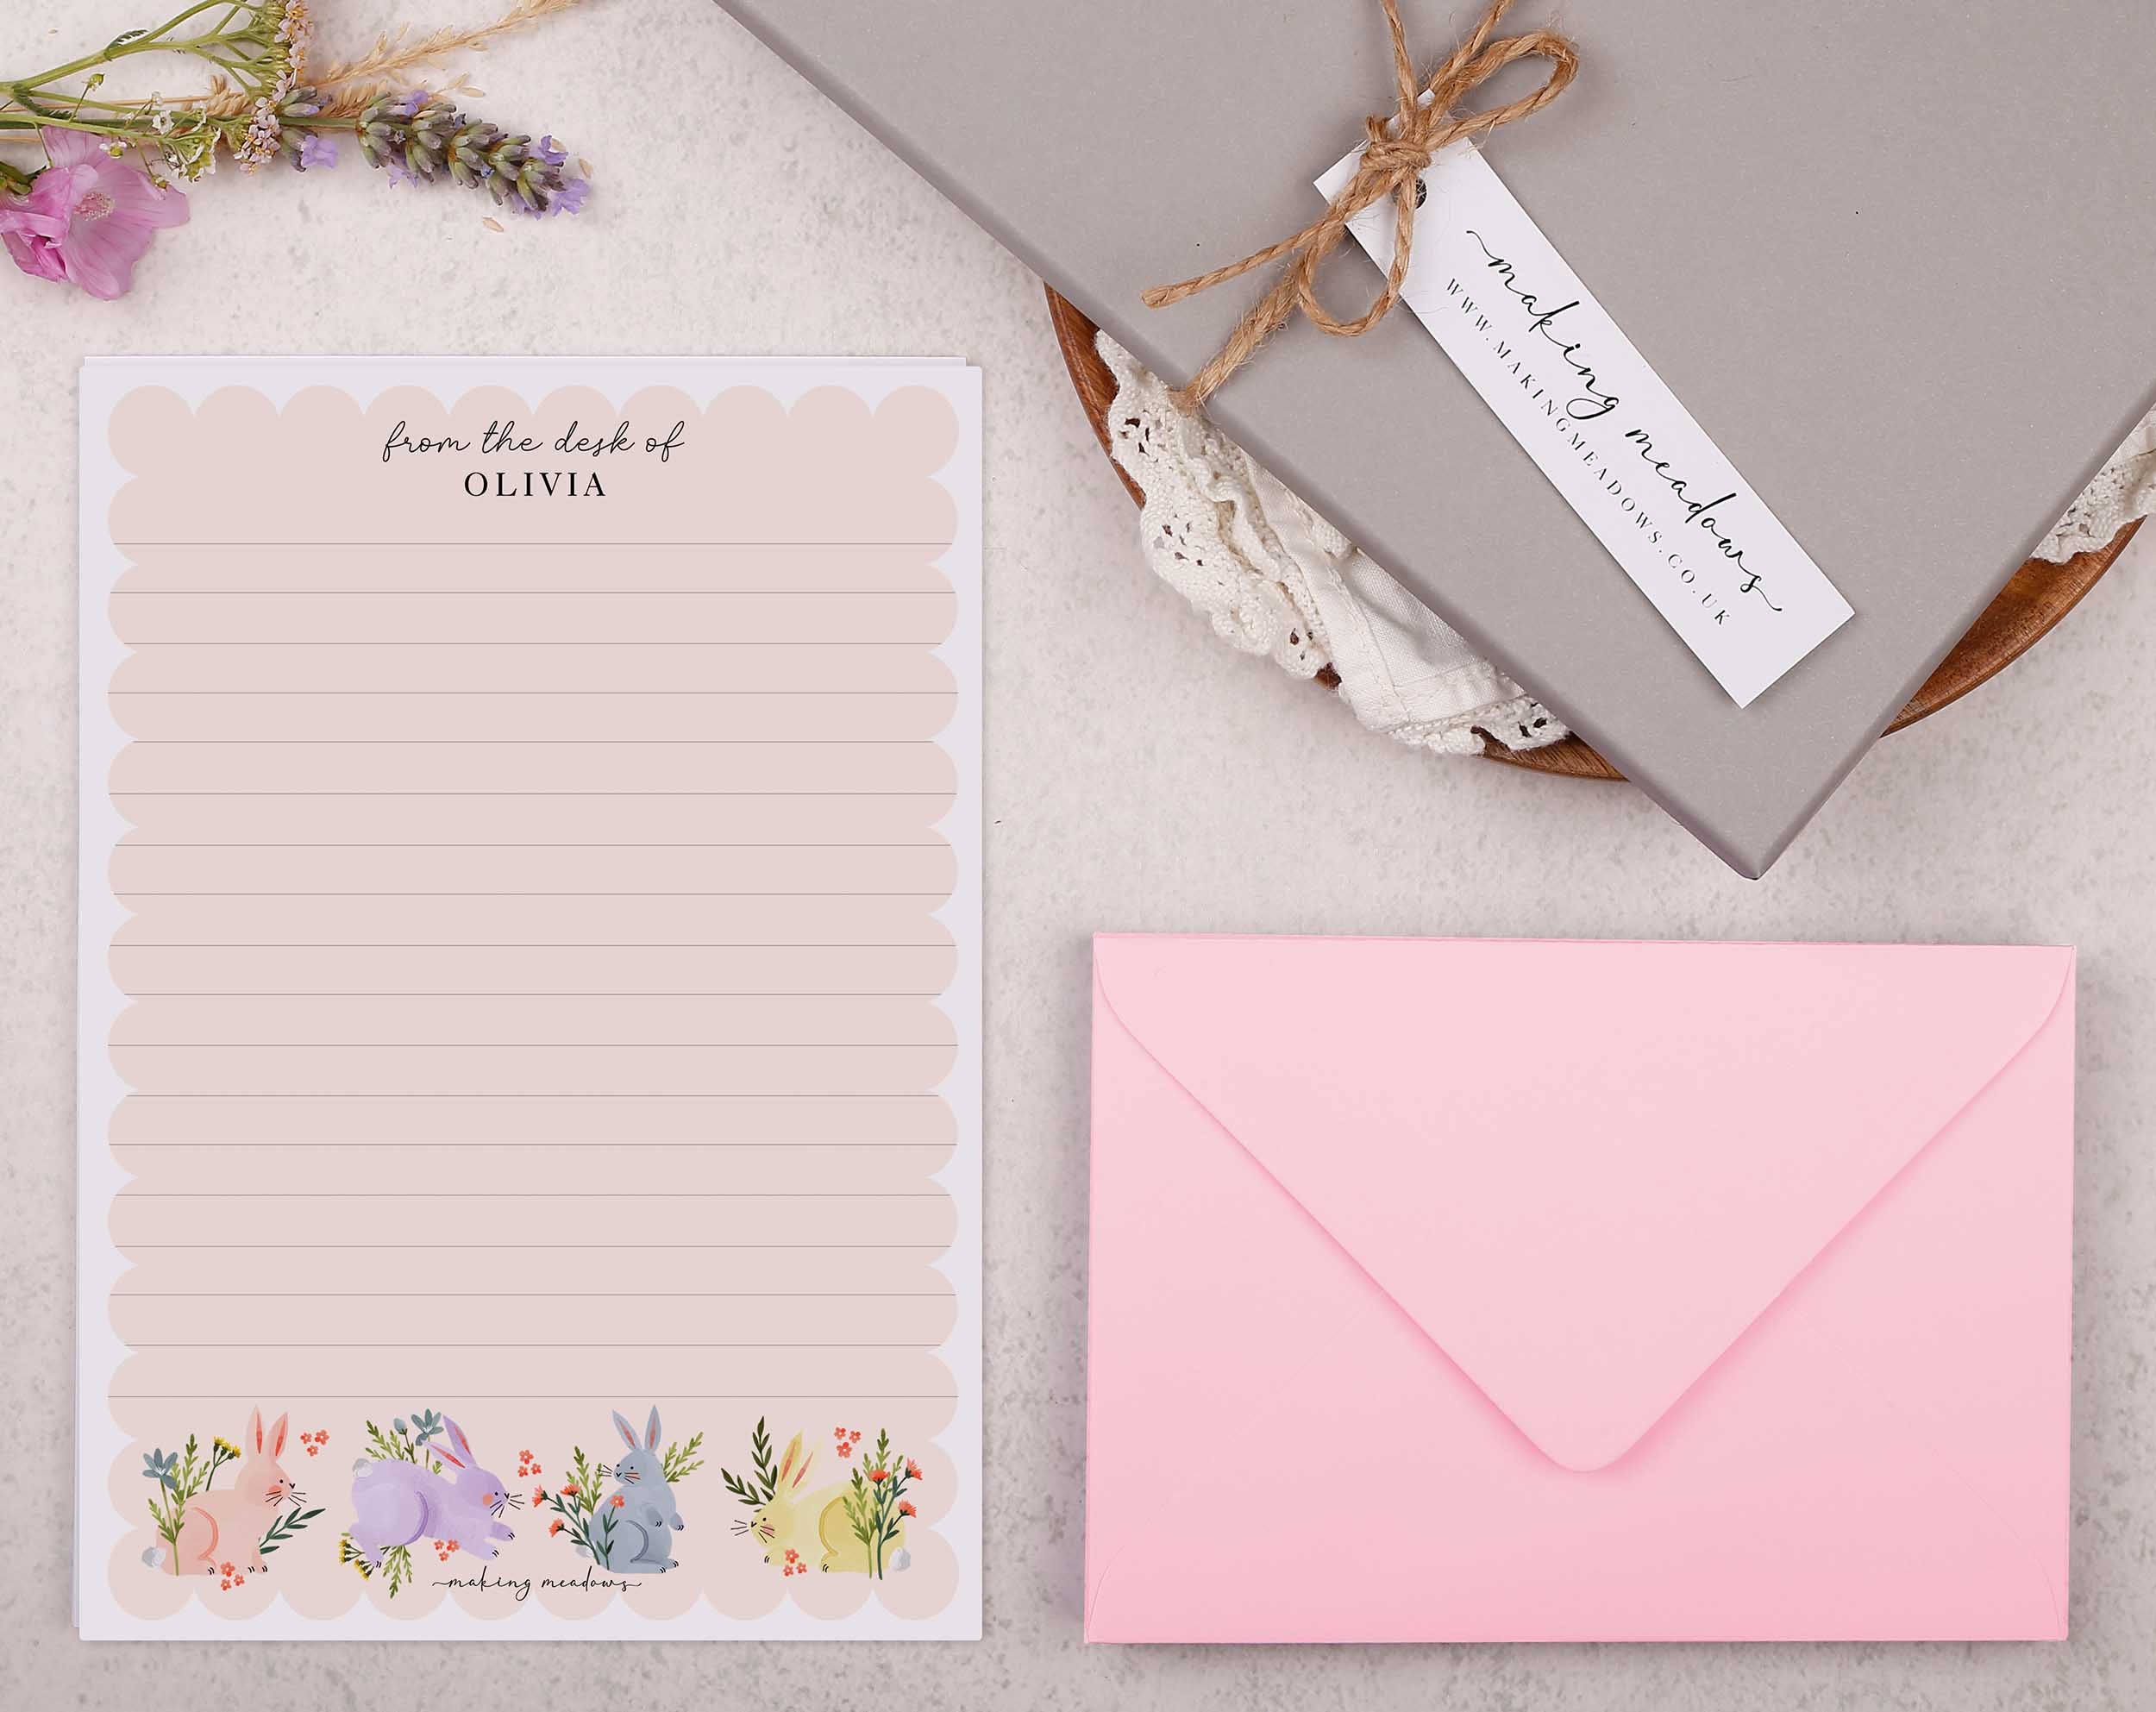 Premium personalised A5 letter writing paper set with bunny rabbits jumping through flowers and a super cute pink scalloped edge borderPremium personalised A5 letter writing paper set with bunny rabbits jumping through flowers and a super cute pink scalloped edge border